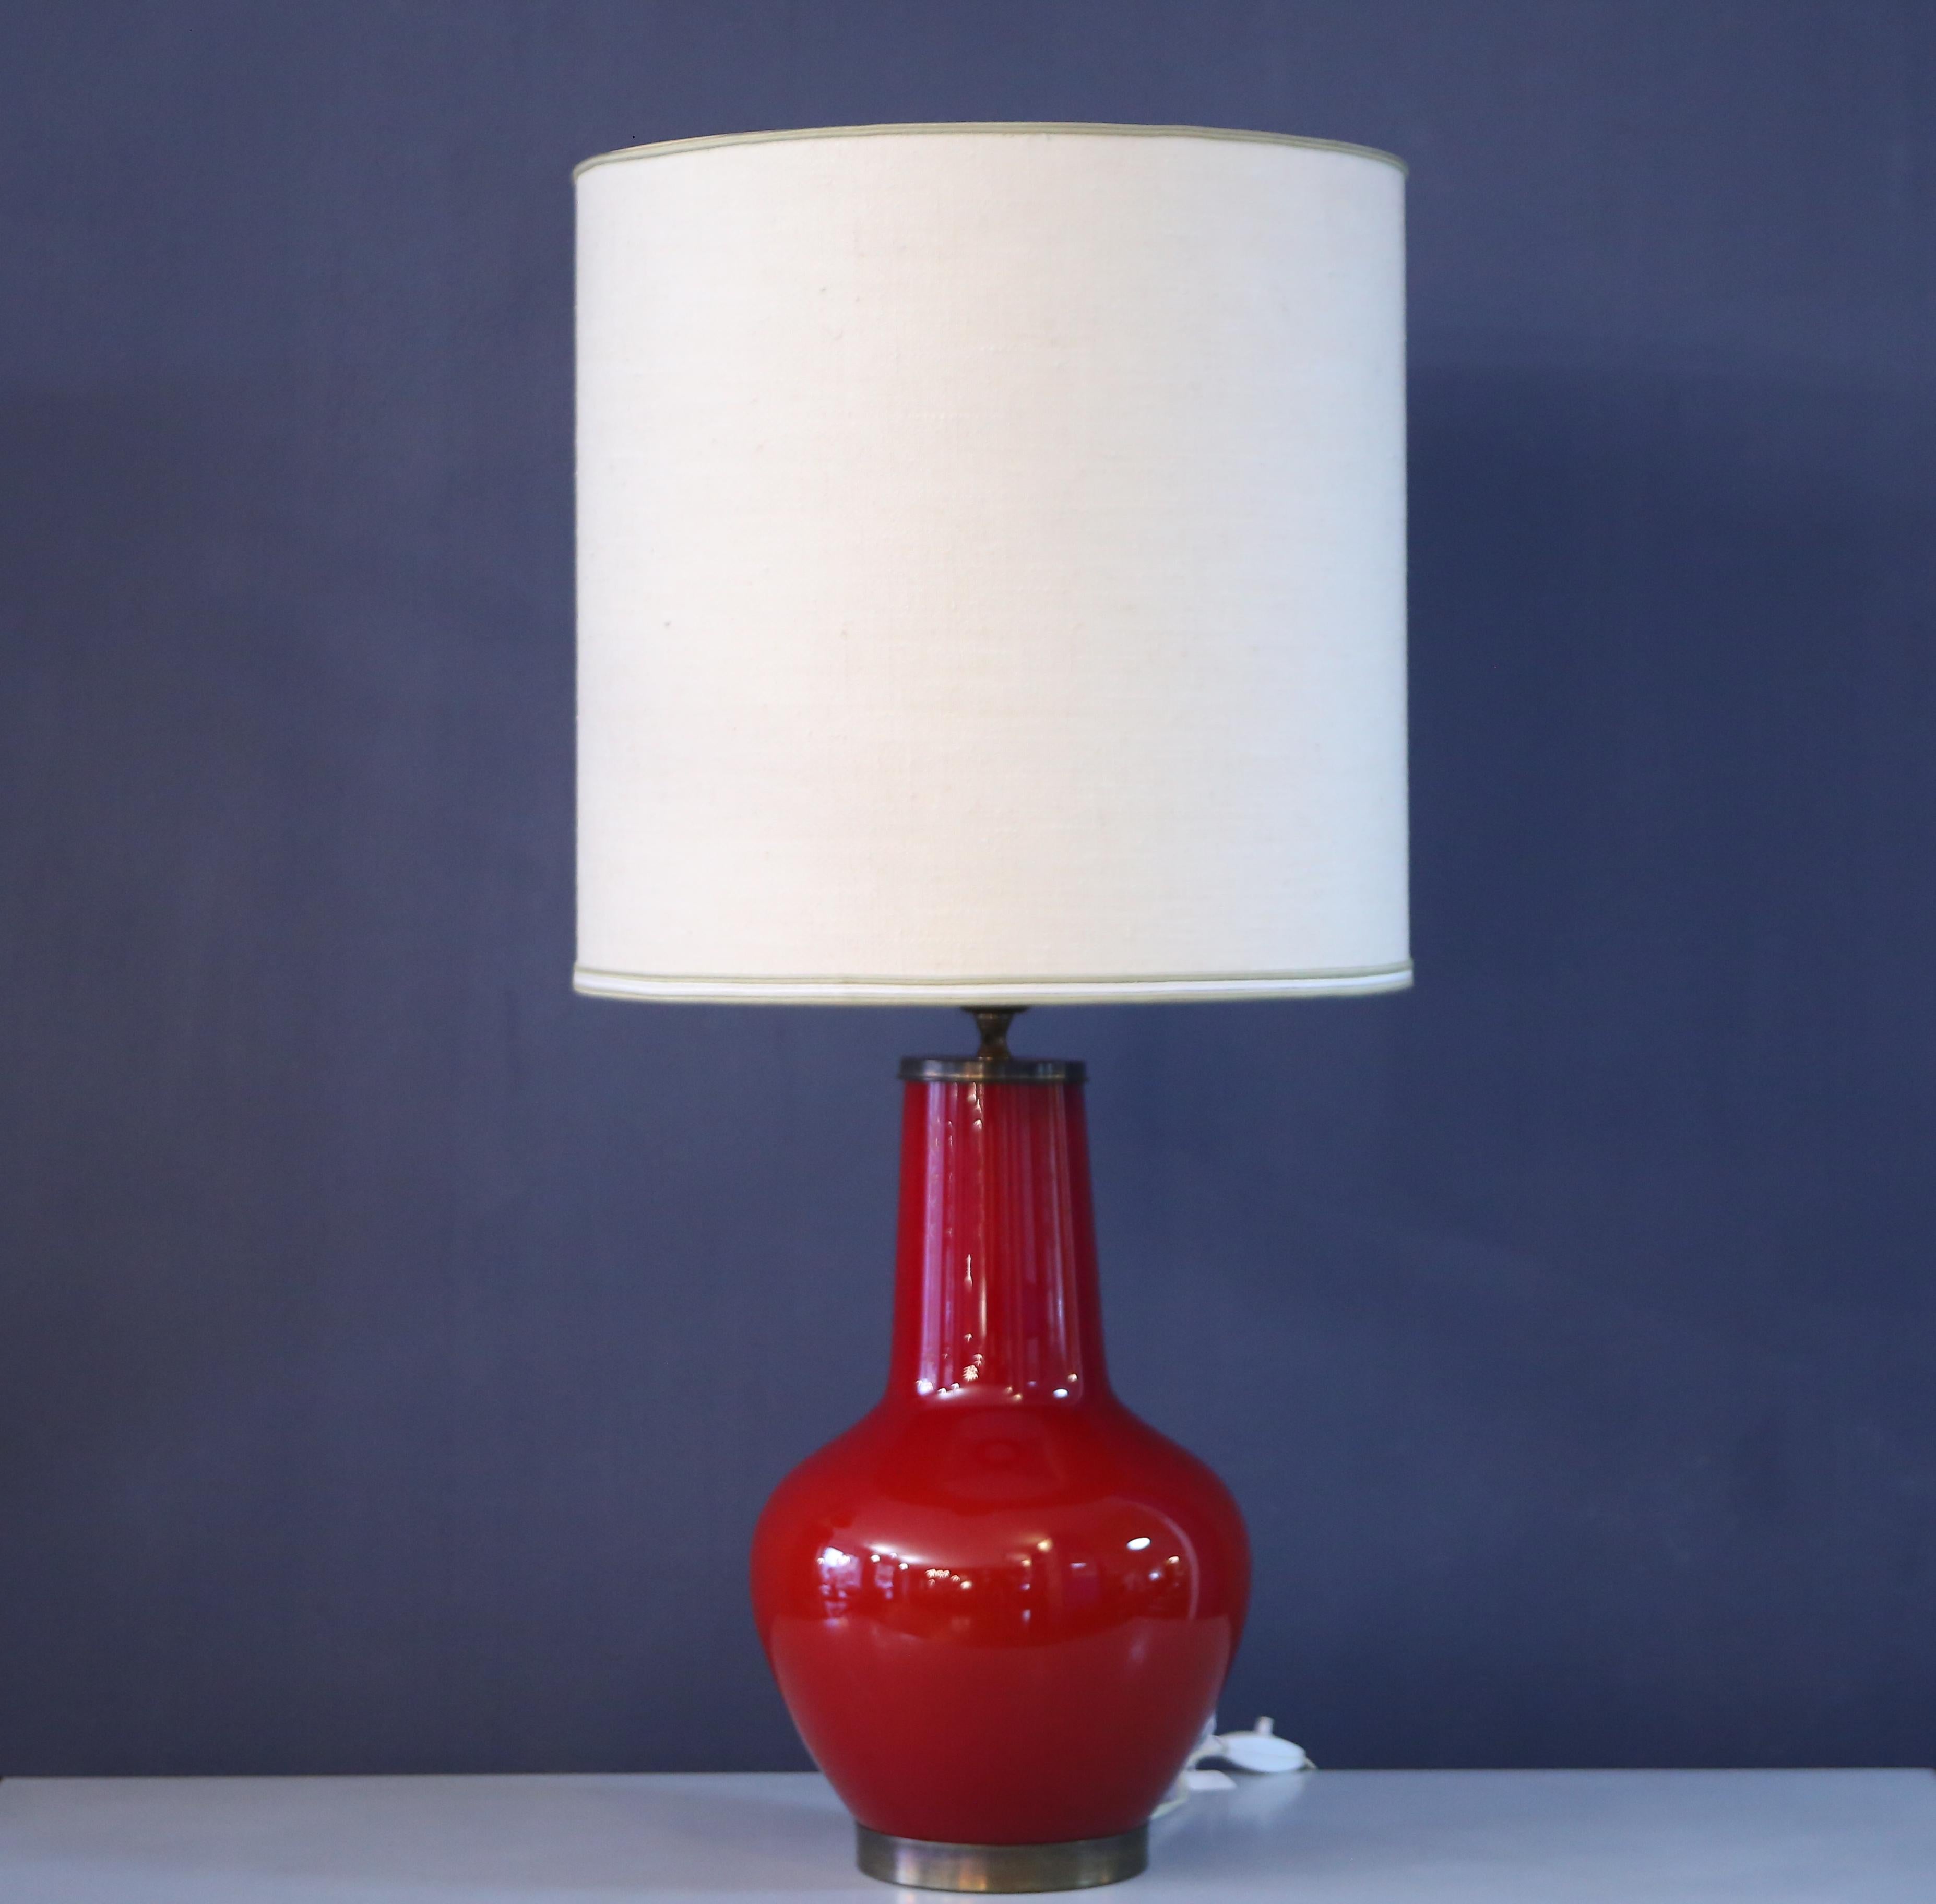 table lamp produced by the stilnovo company in the 1950s. This lamp is made of layered glass. excellent for modern spaces